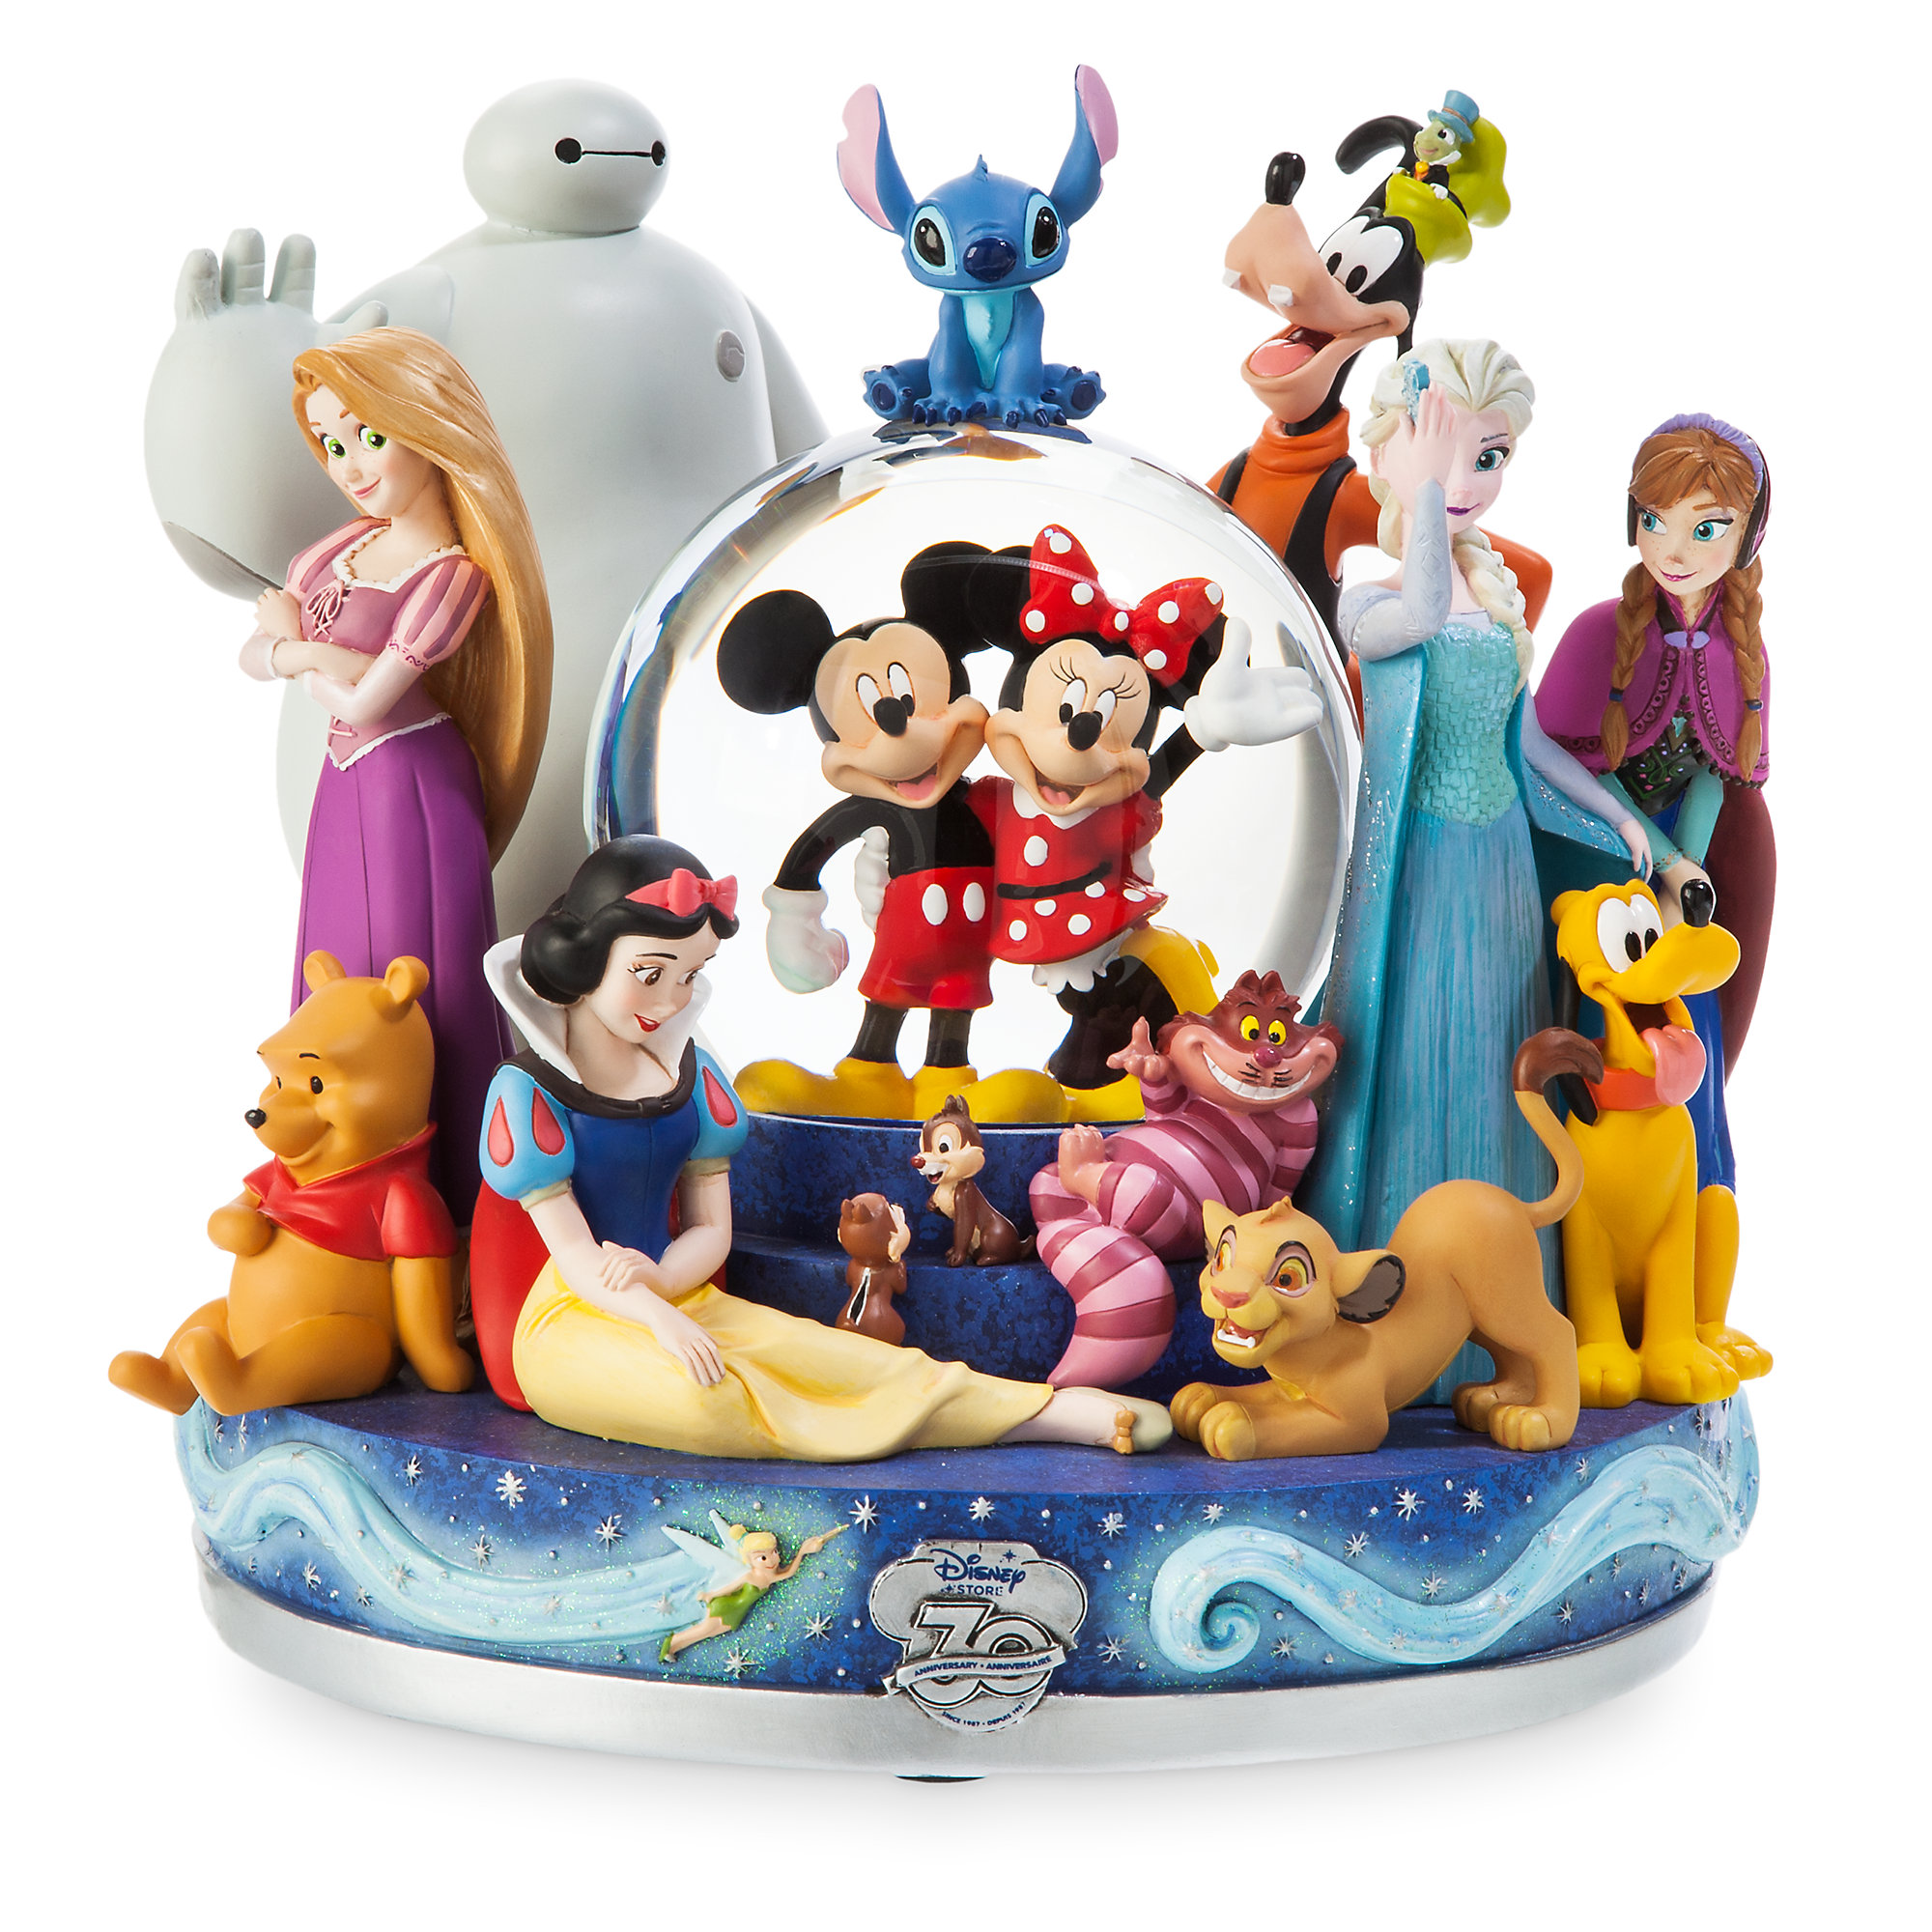 Take A Sneak Peak At The Disney Store Limited Edition 30th